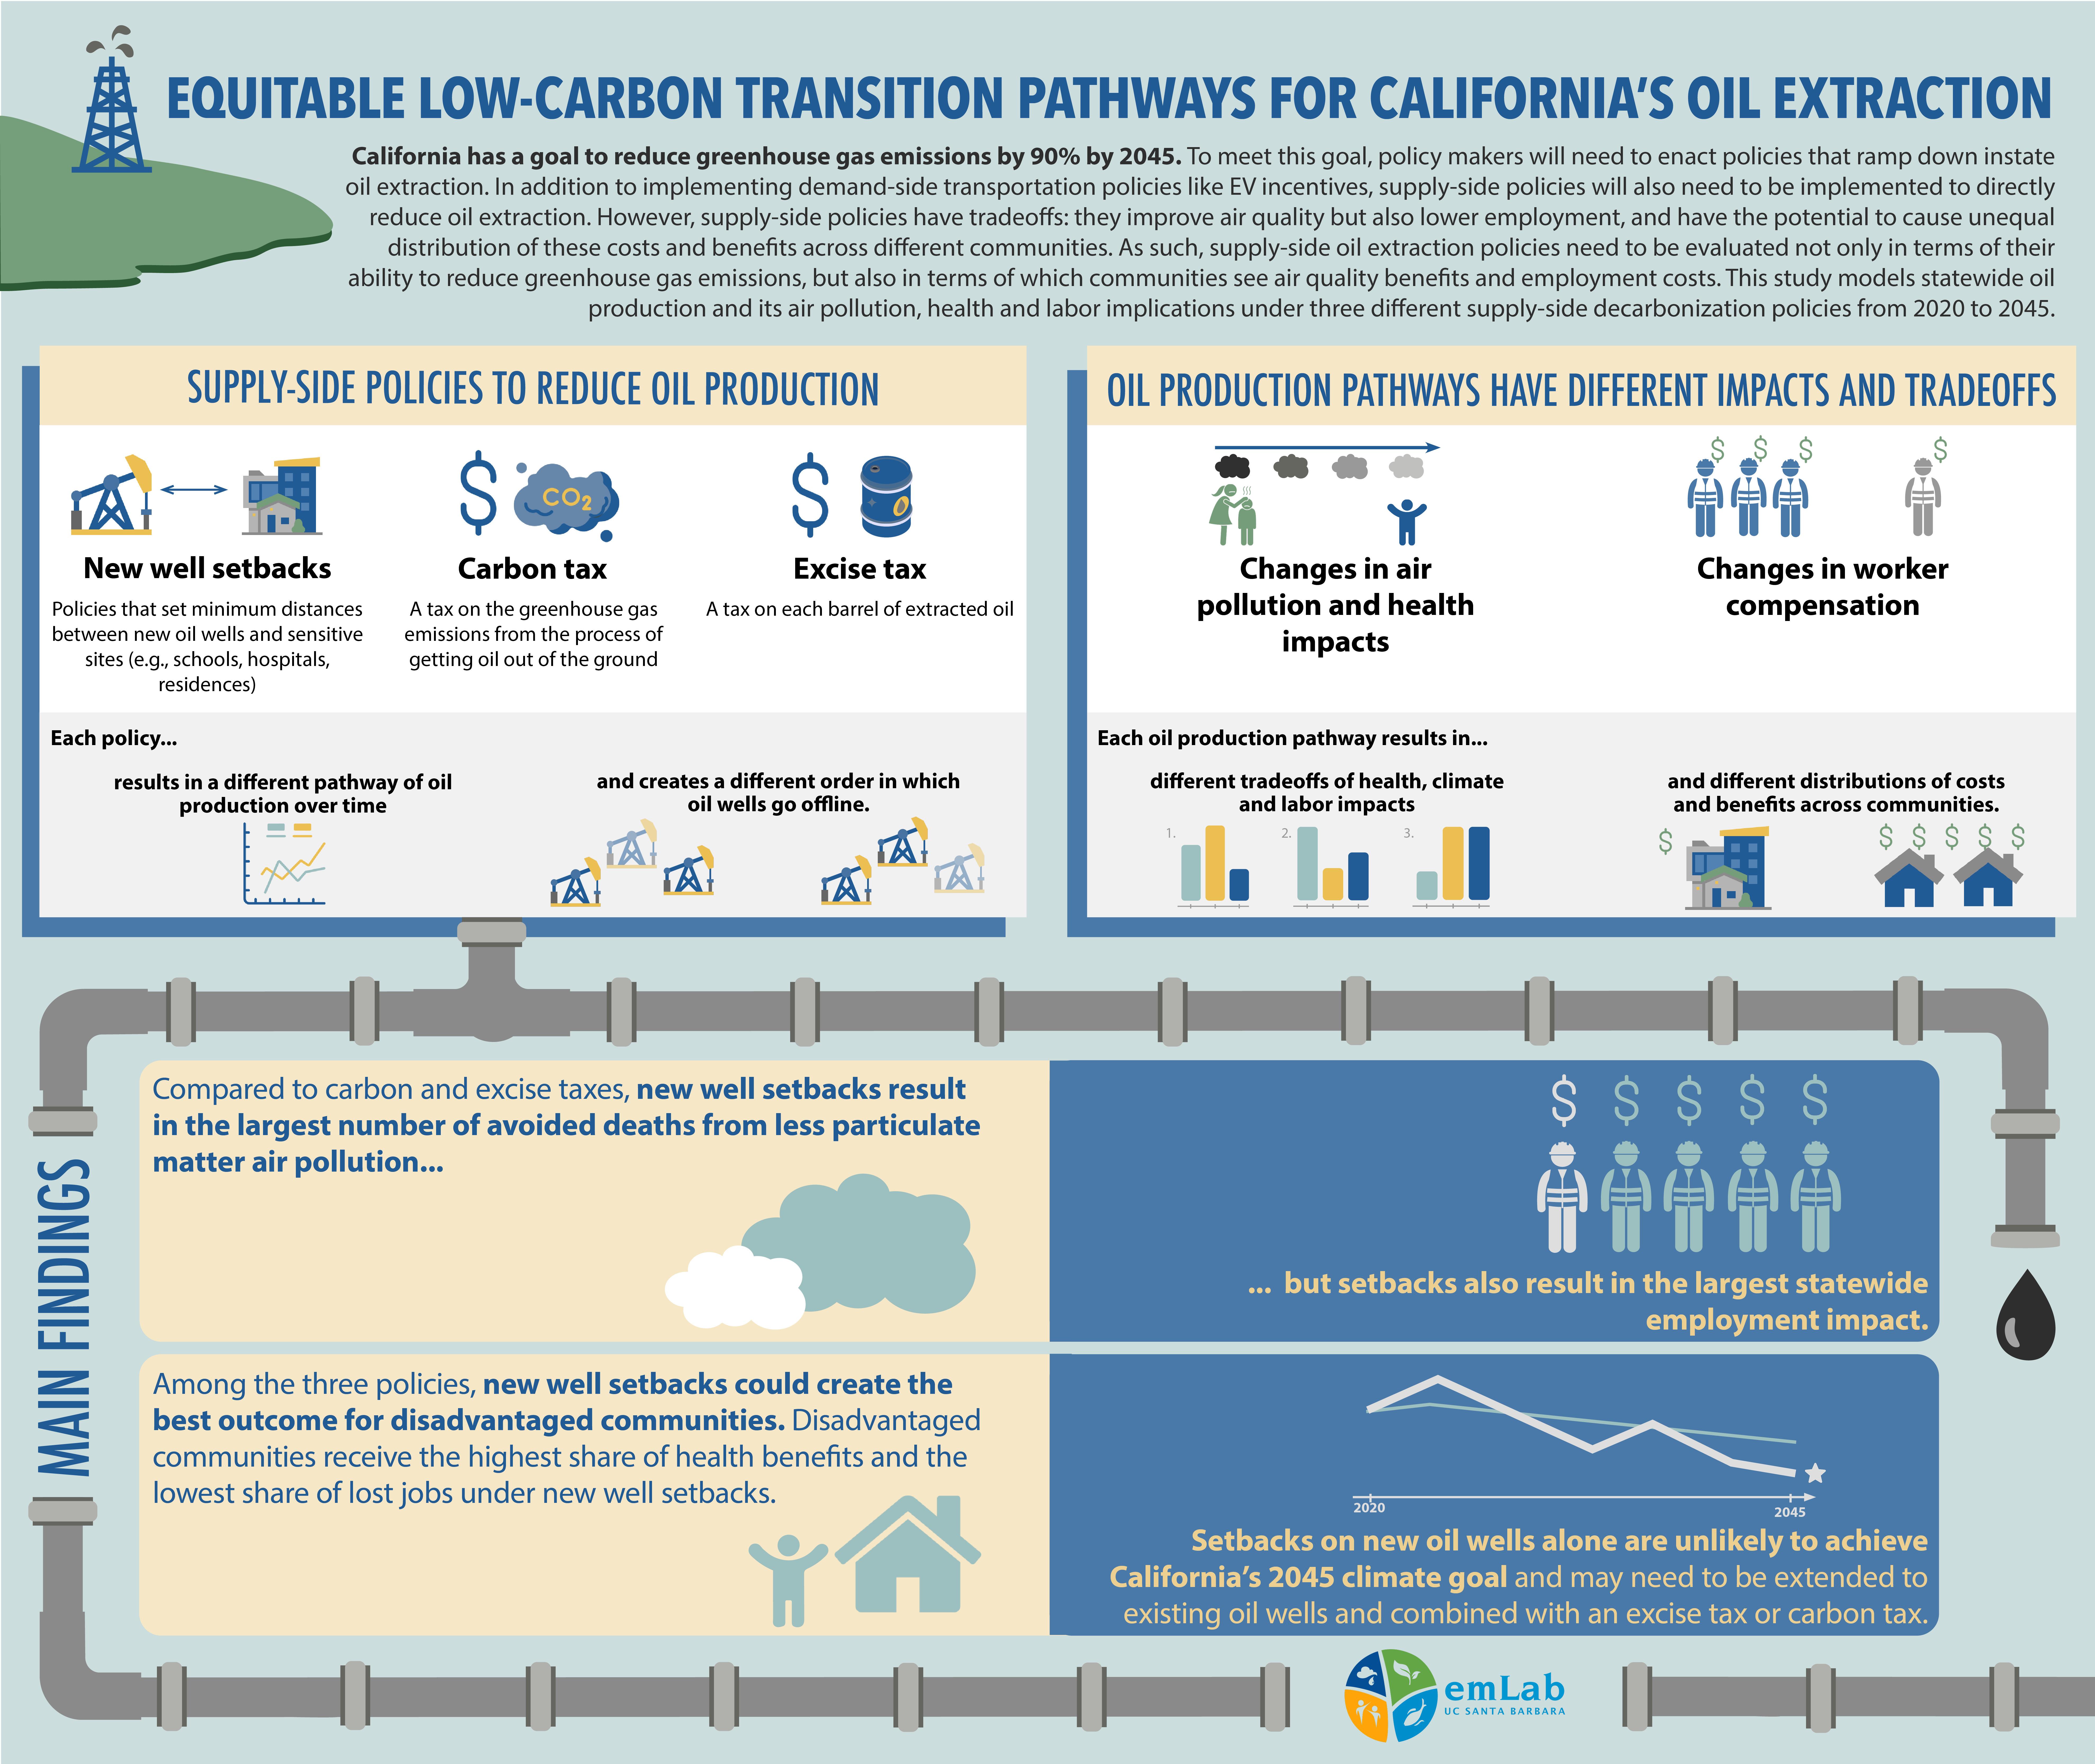 infographic of the main takeaways for the equitable low-carbon transition pathways for California's oil extraction